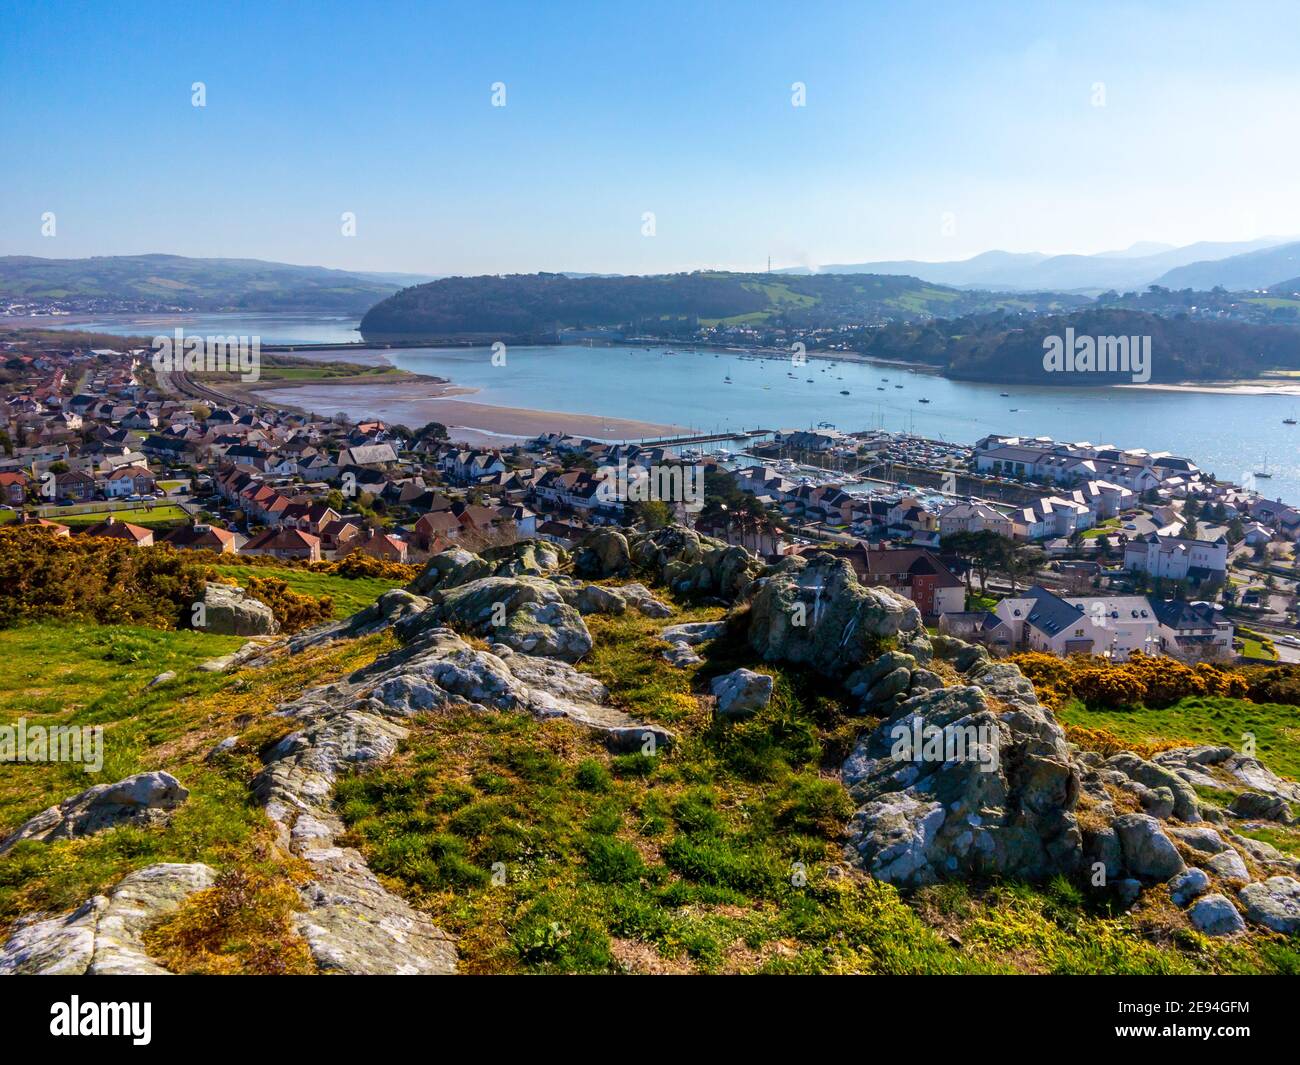 View looking down over Deganwy and the mouth of the River Conwy in Conwy North Wales from the ruins of Deganwy Castle with rocks in foreground. Stock Photo